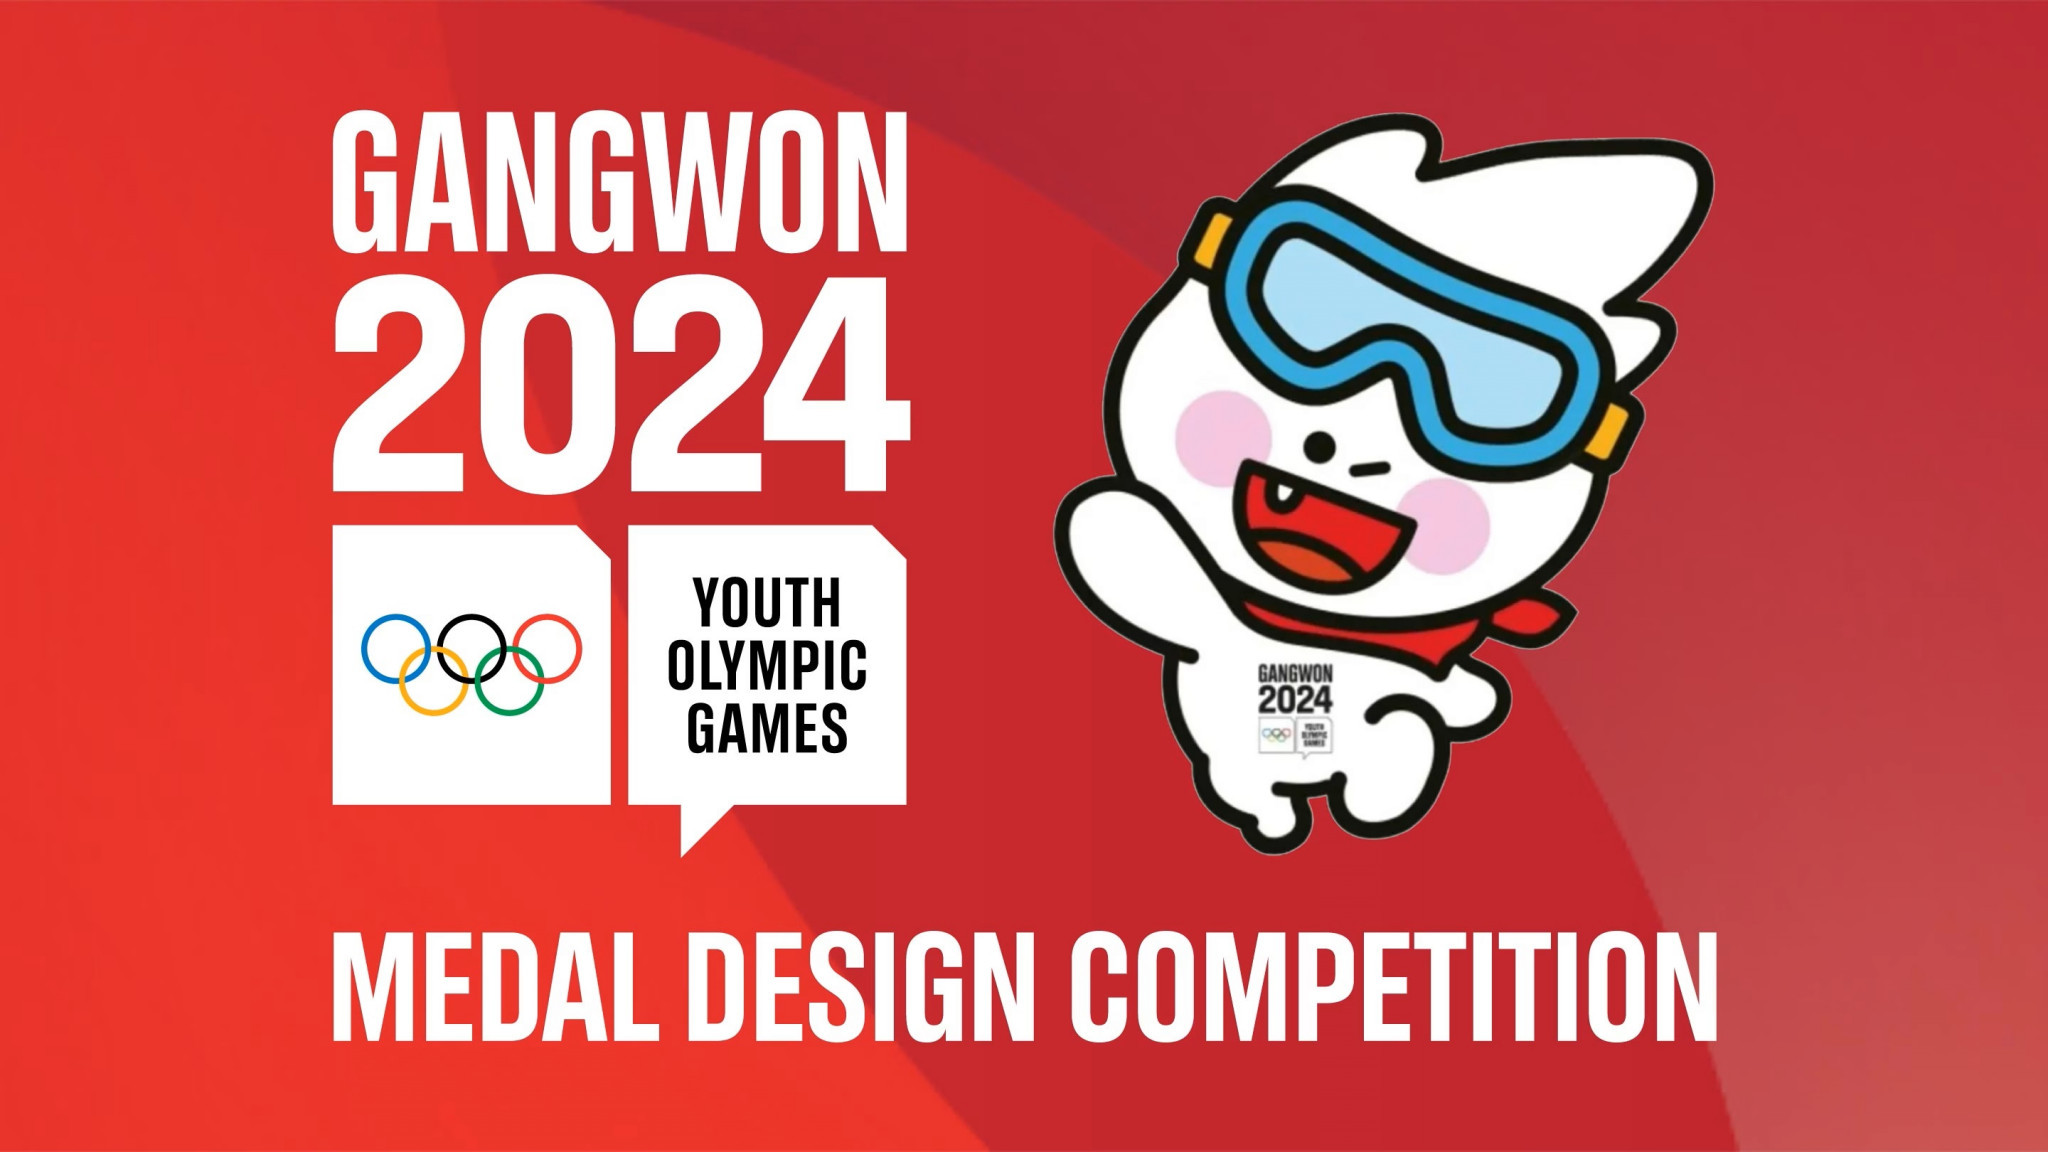 Record 3,000 entries received for Gangwon 2024 medal design contest